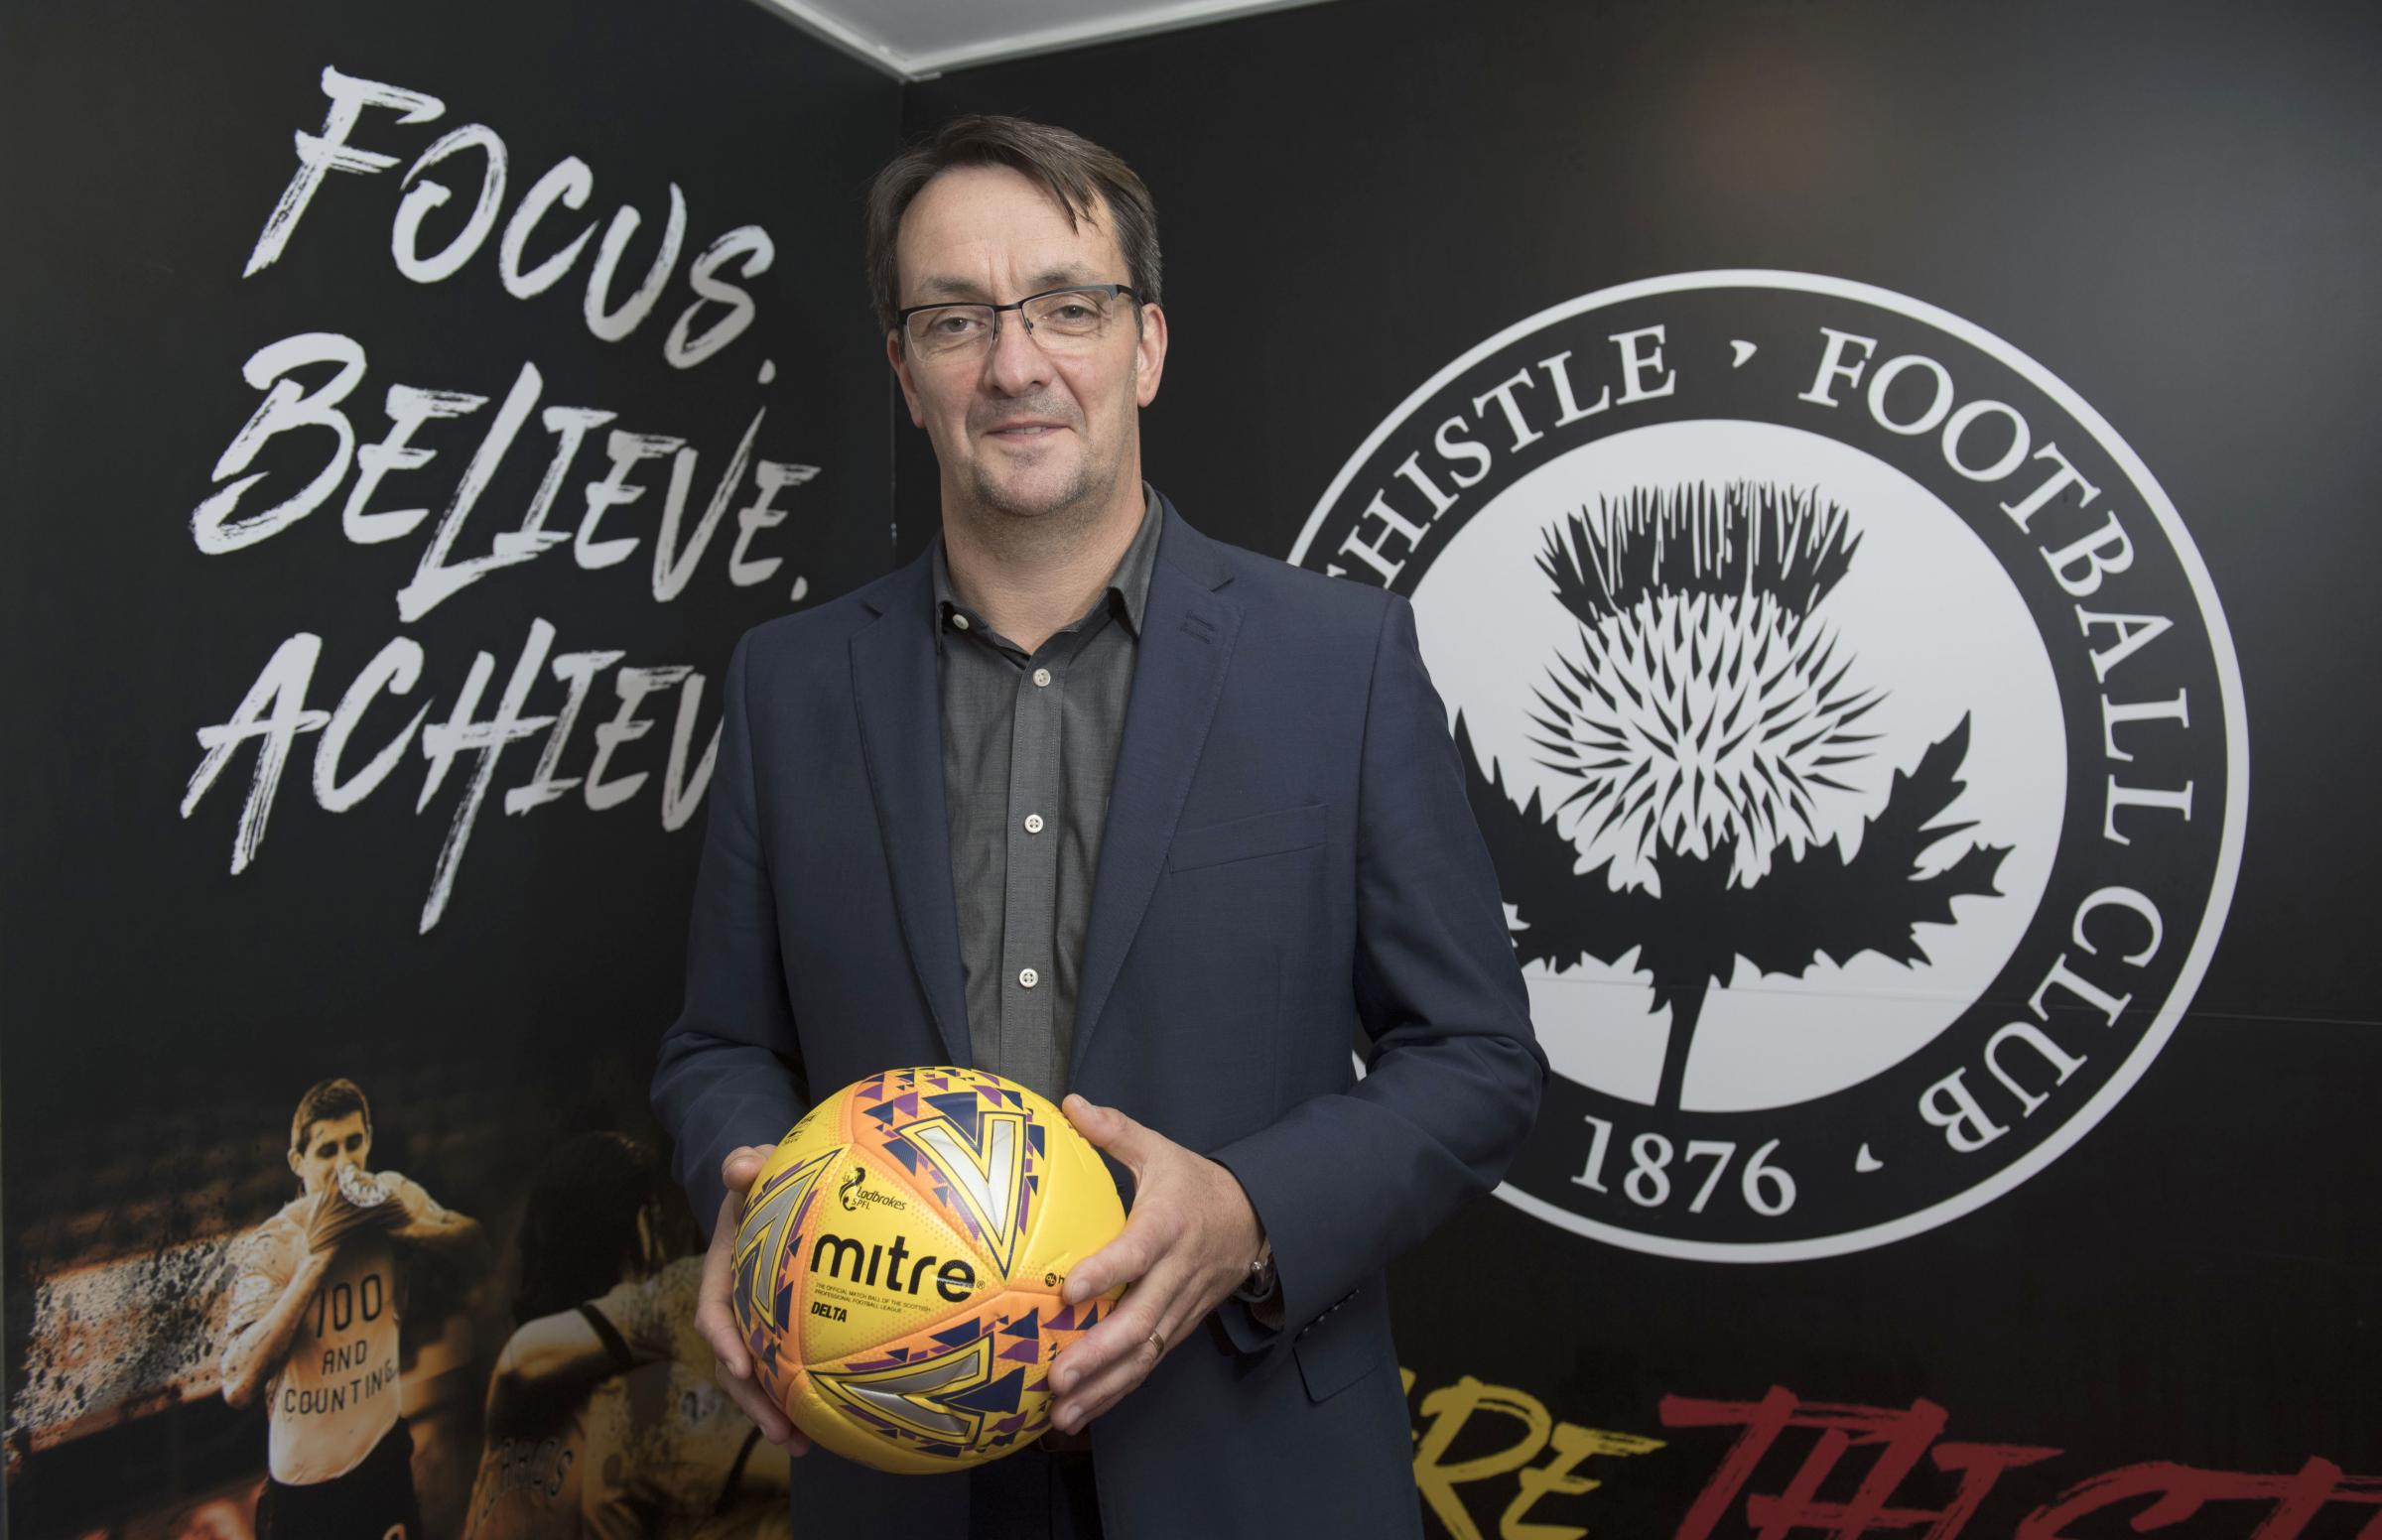 Clubs are afraid to speak out against SPFL, says Partick Thistle chief